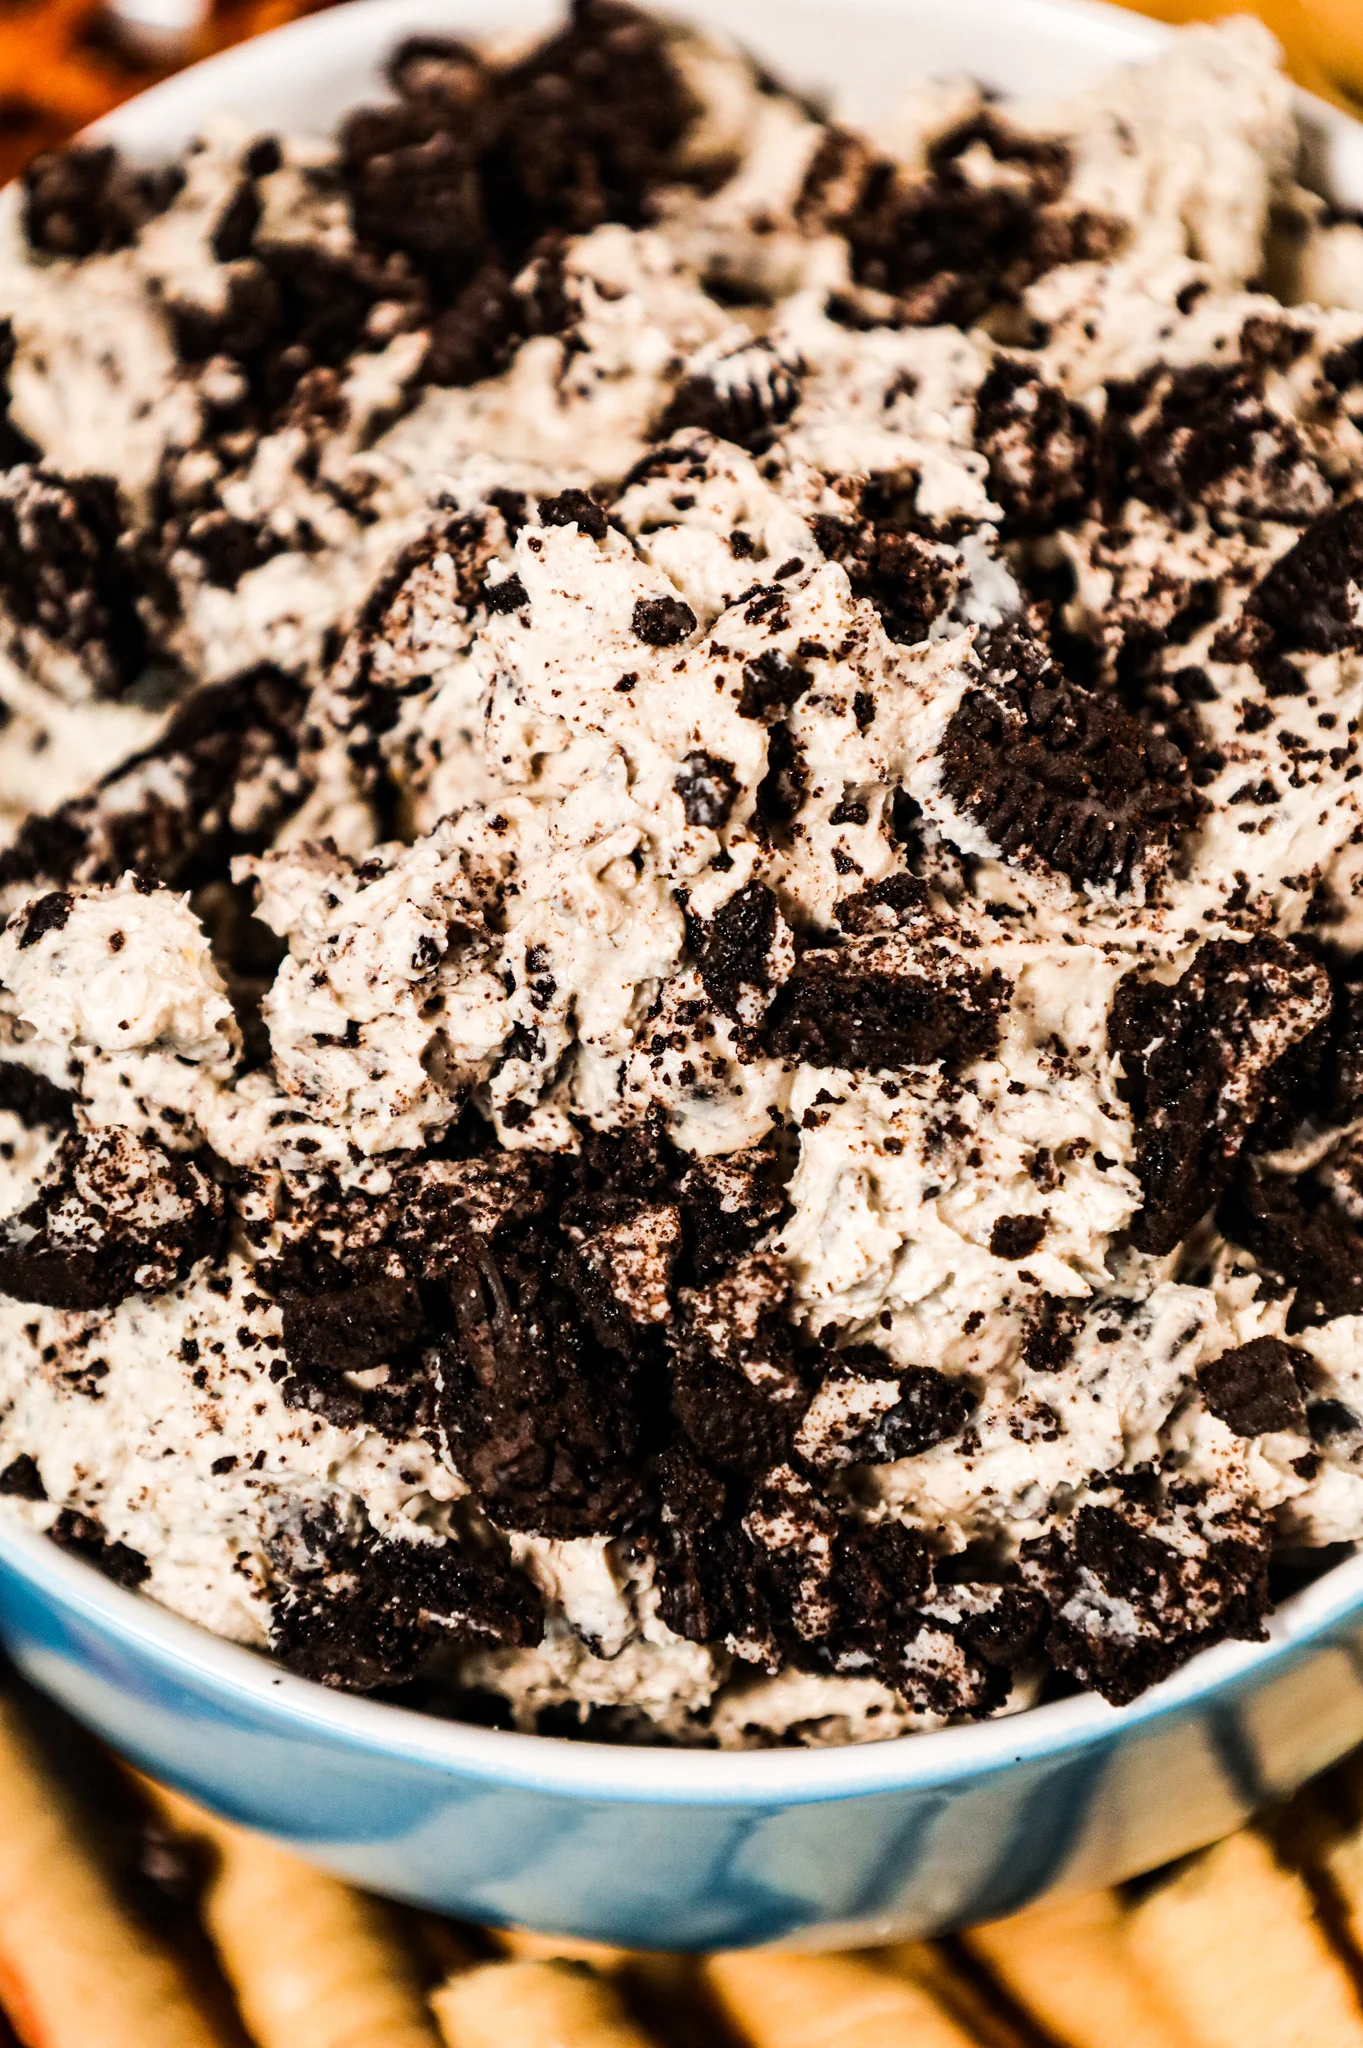 Oreo Dip is an easy no bake dessert recipe made with cream cheese, Cool Whip, powdered sugar and loaded with crumbled Oreo cookies.